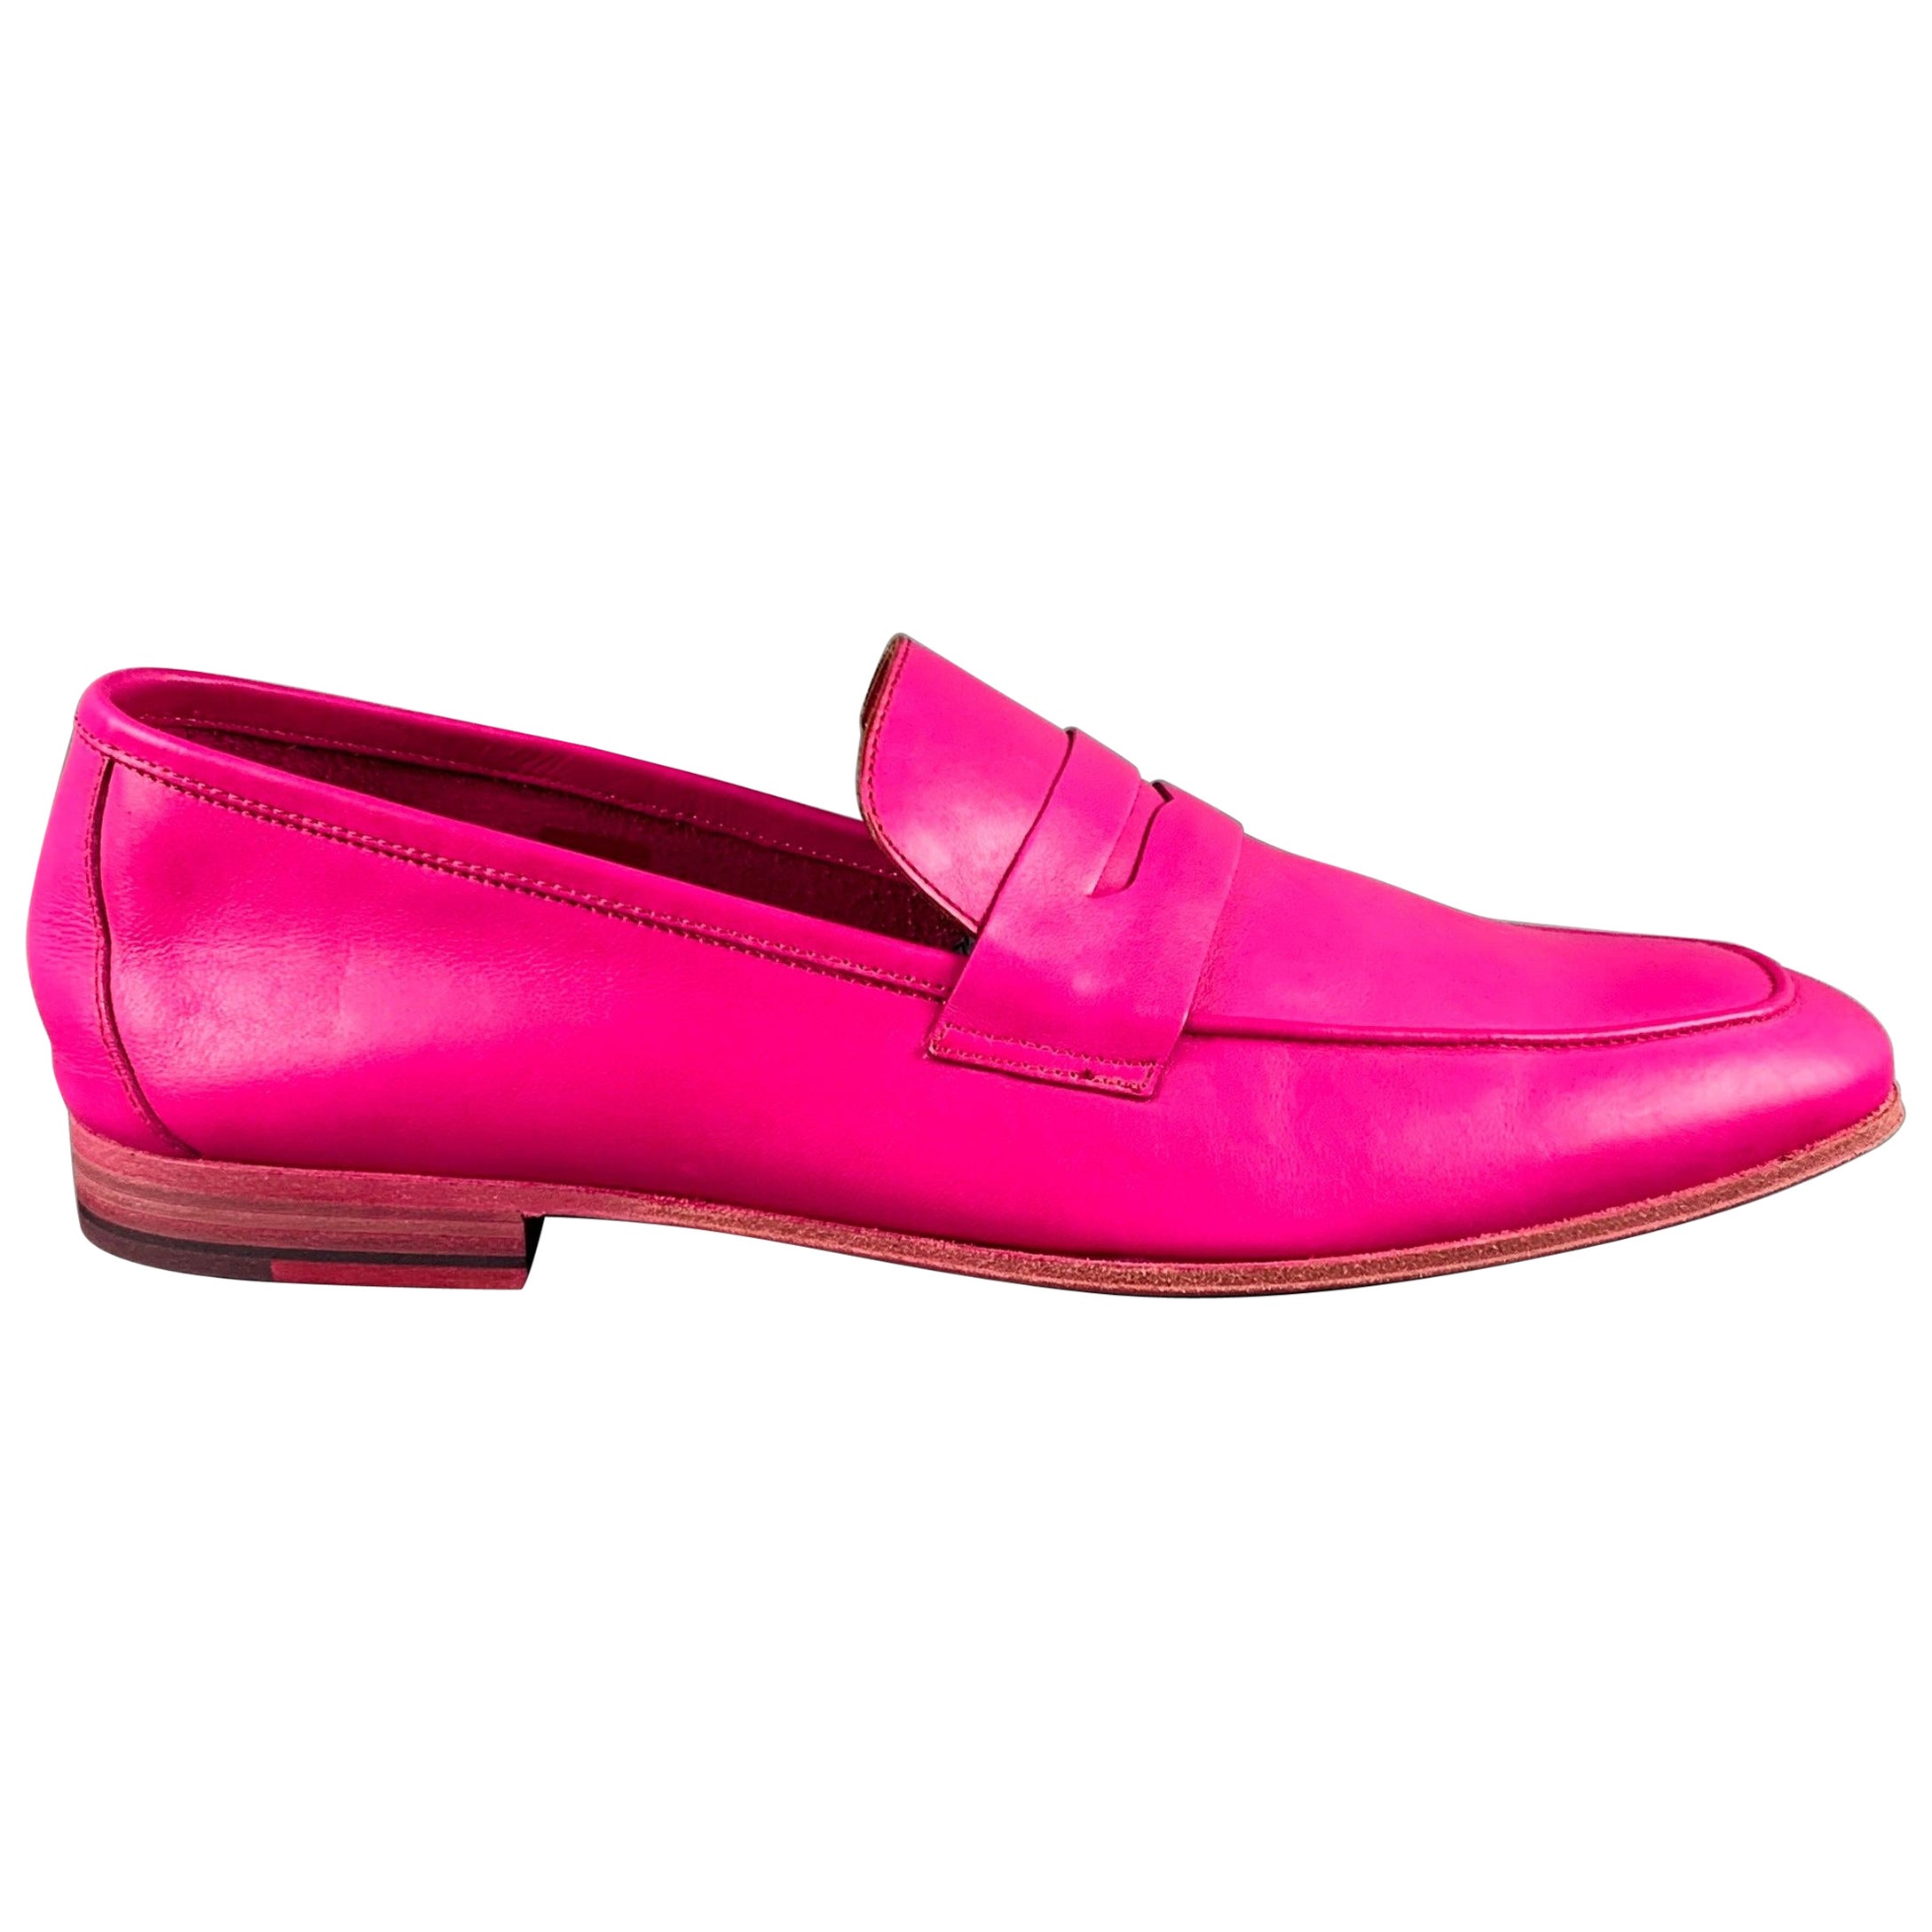 PAUL SMITH Size 10 Fuchsia Pink Leather Slip On Loafers For Sale